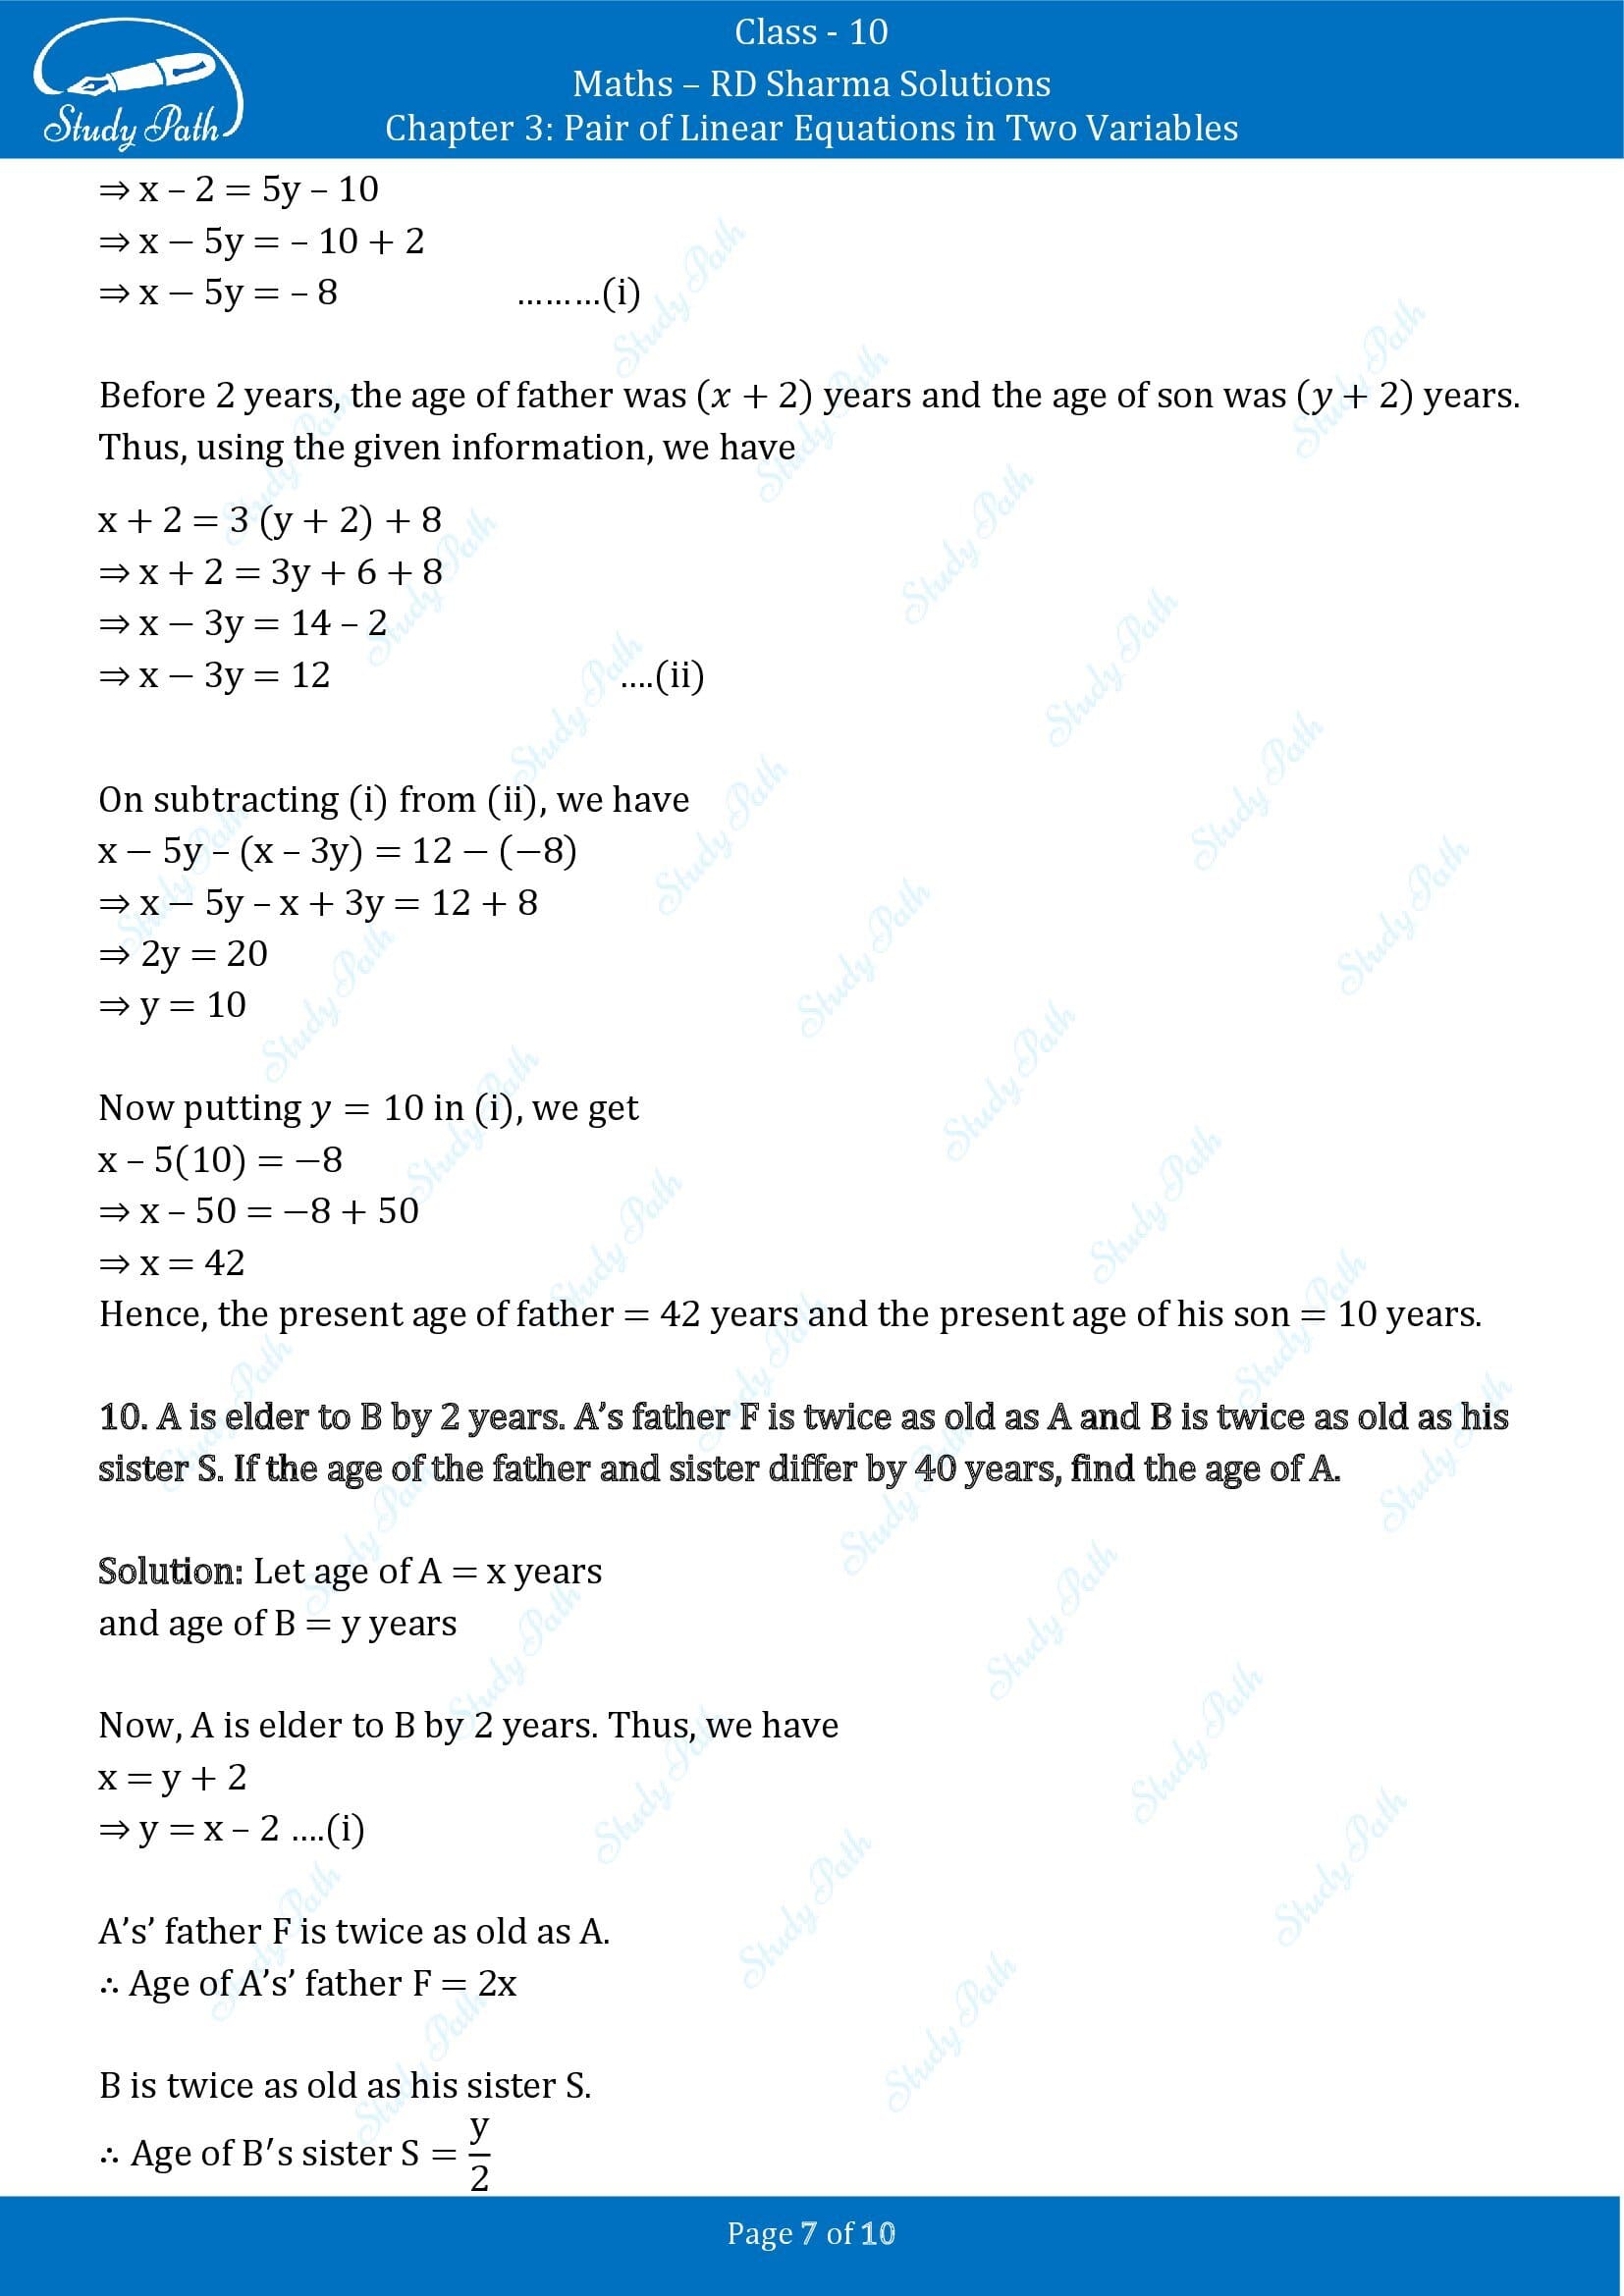 RD Sharma Solutions Class 10 Chapter 3 Pair of Linear Equations in Two Variables Exercise 3.9 00007